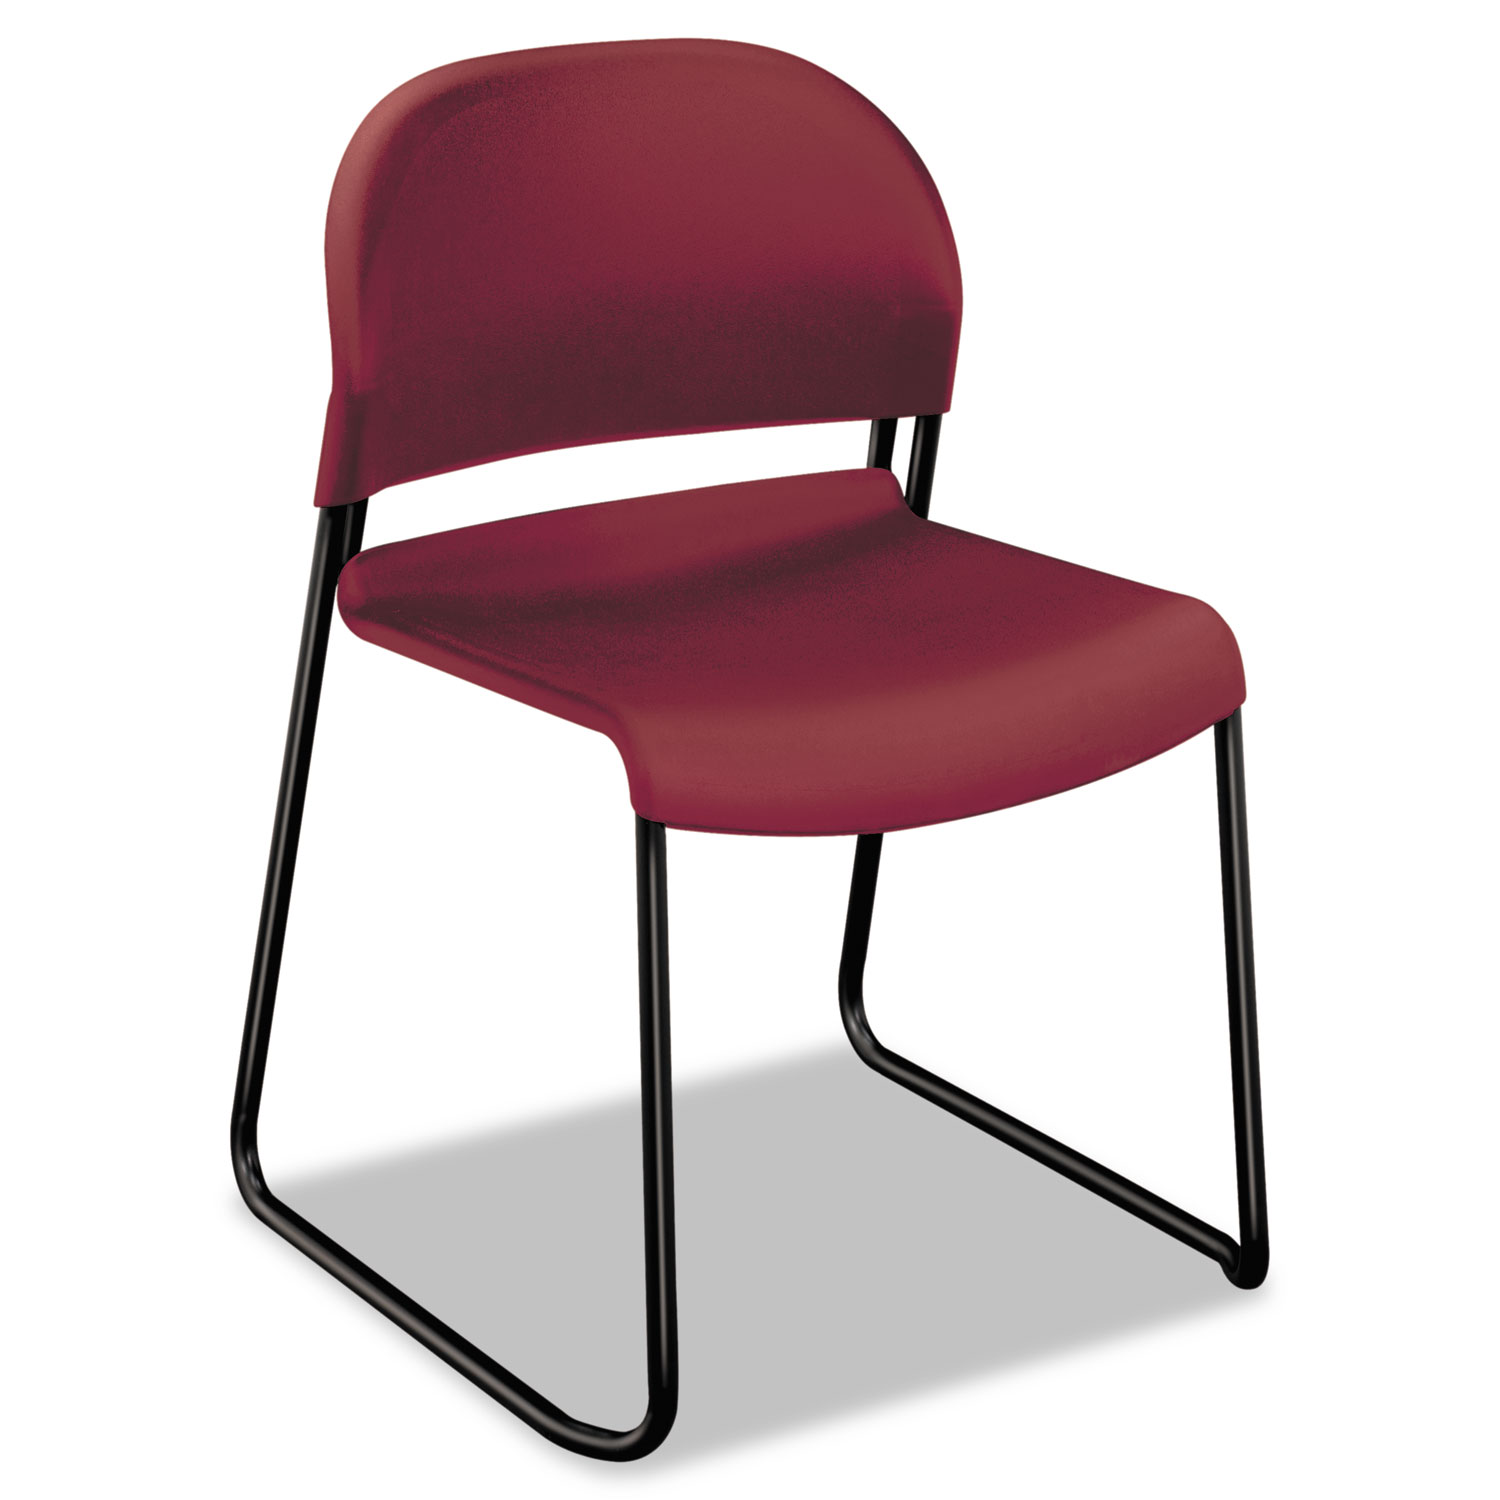 GuestStacker High Density Chairs, Mulberry Seat/Mulberry Back, Black Base, 4/Carton